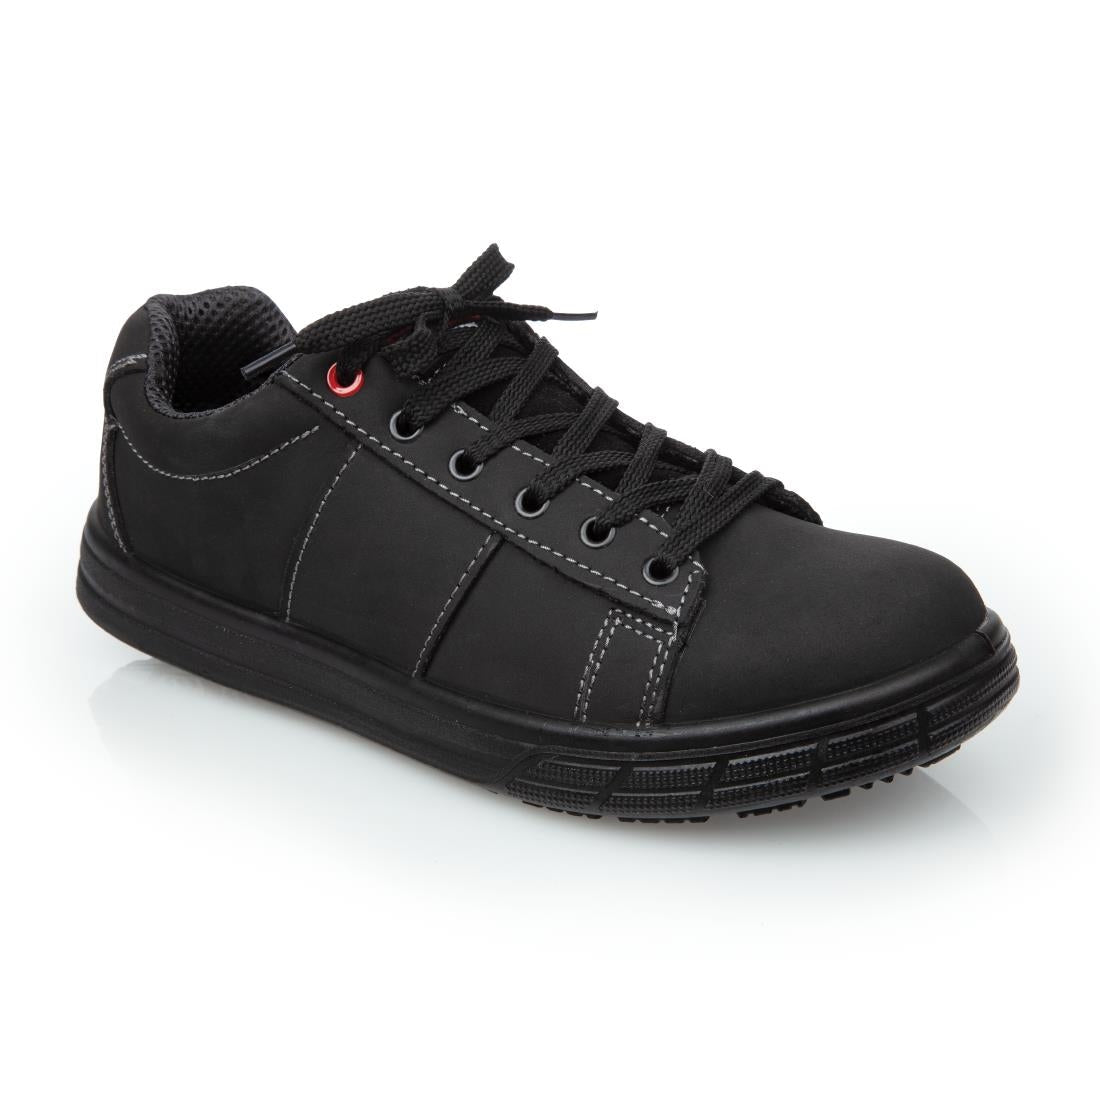 BB420-46 Slipbuster Safety Trainers Black 46 JD Catering Equipment Solutions Ltd